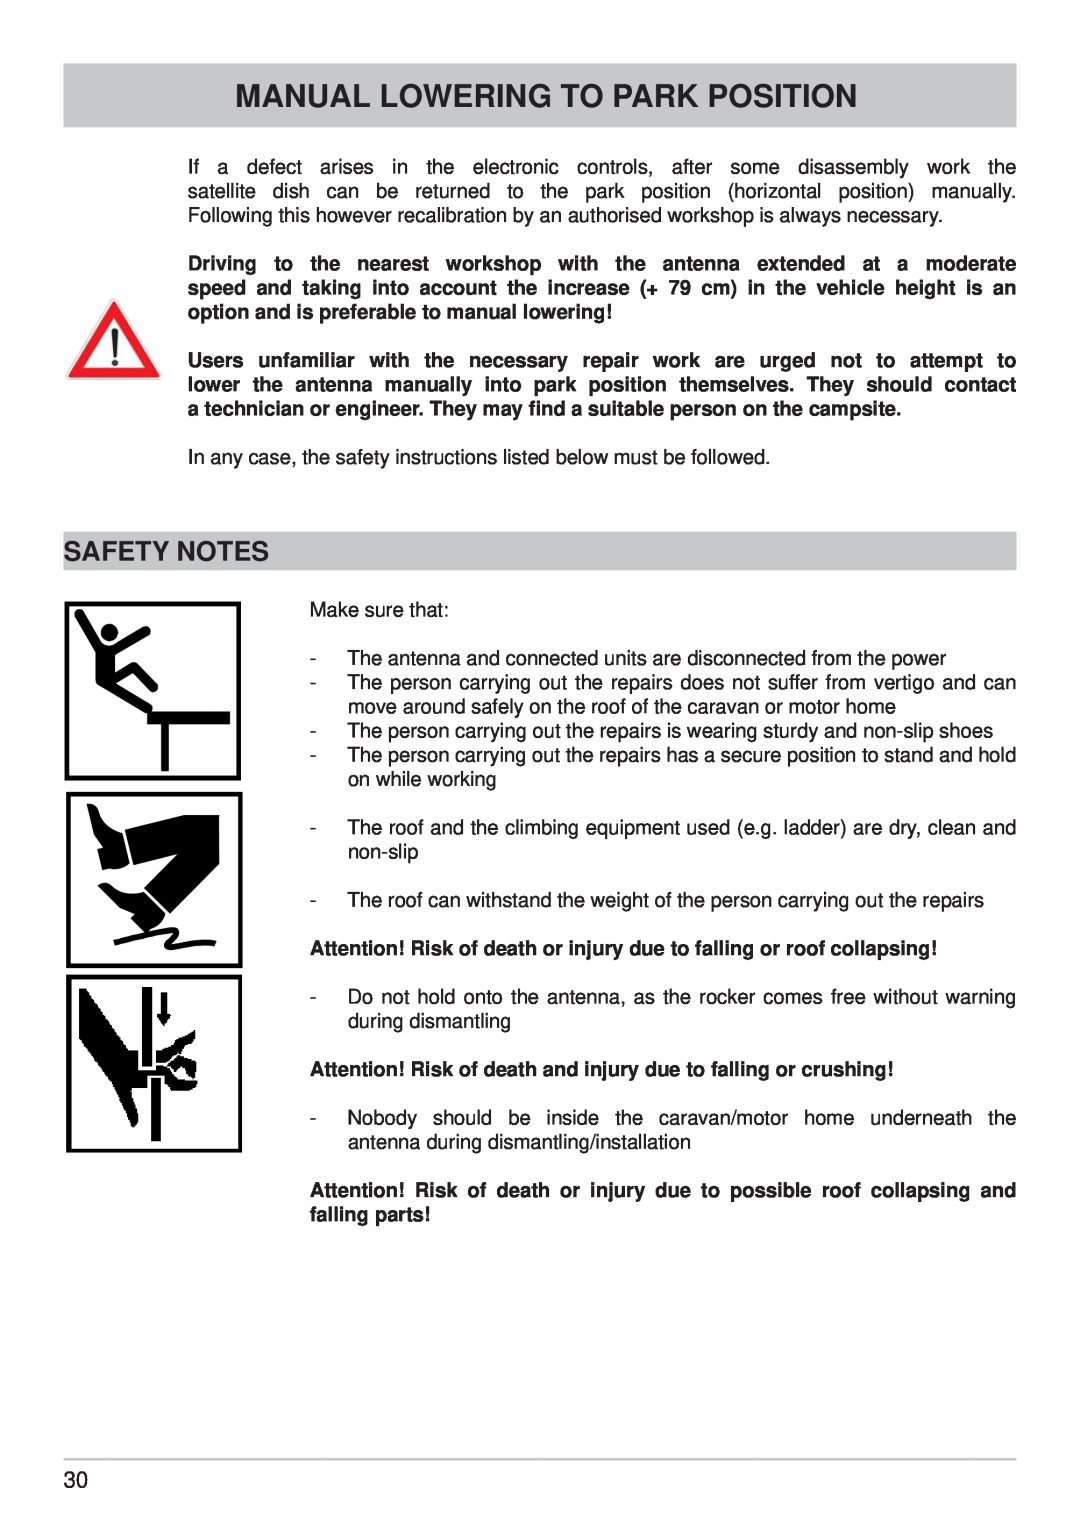 Kathrein CAP 700 manual Manual Lowering To Park Position, Safety Notes 